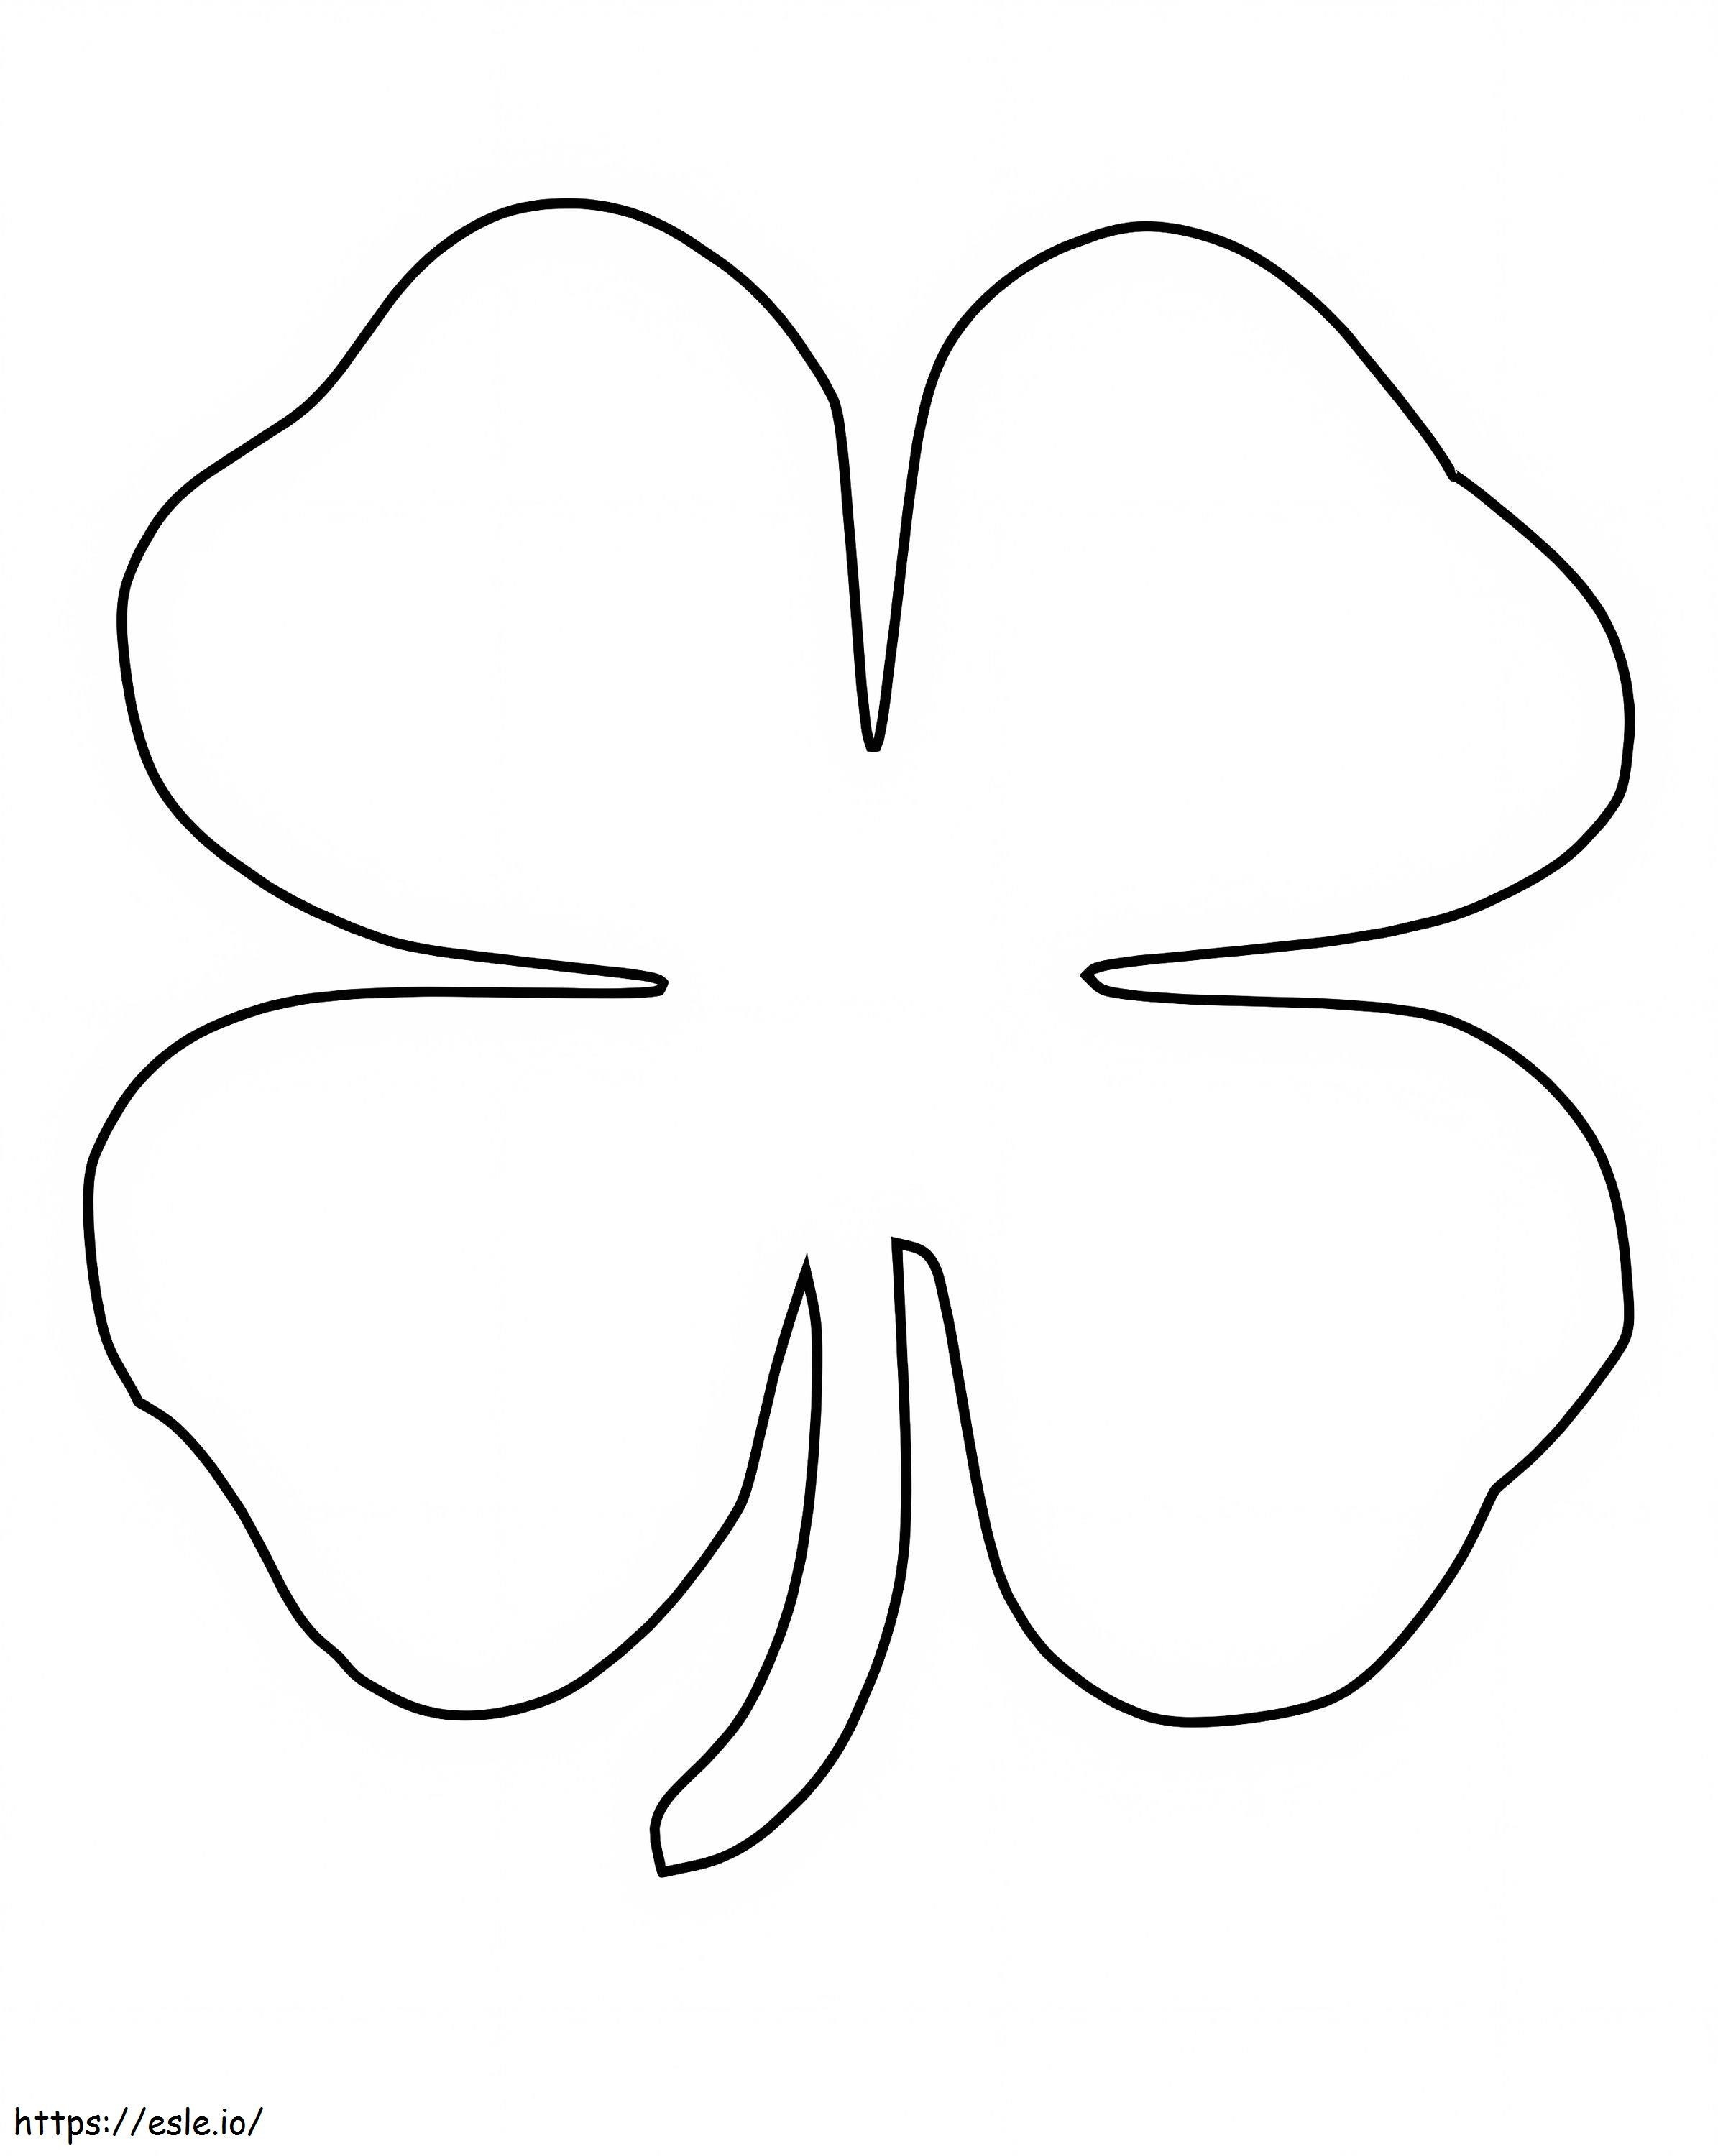 Four Leaf Clover 4 coloring page